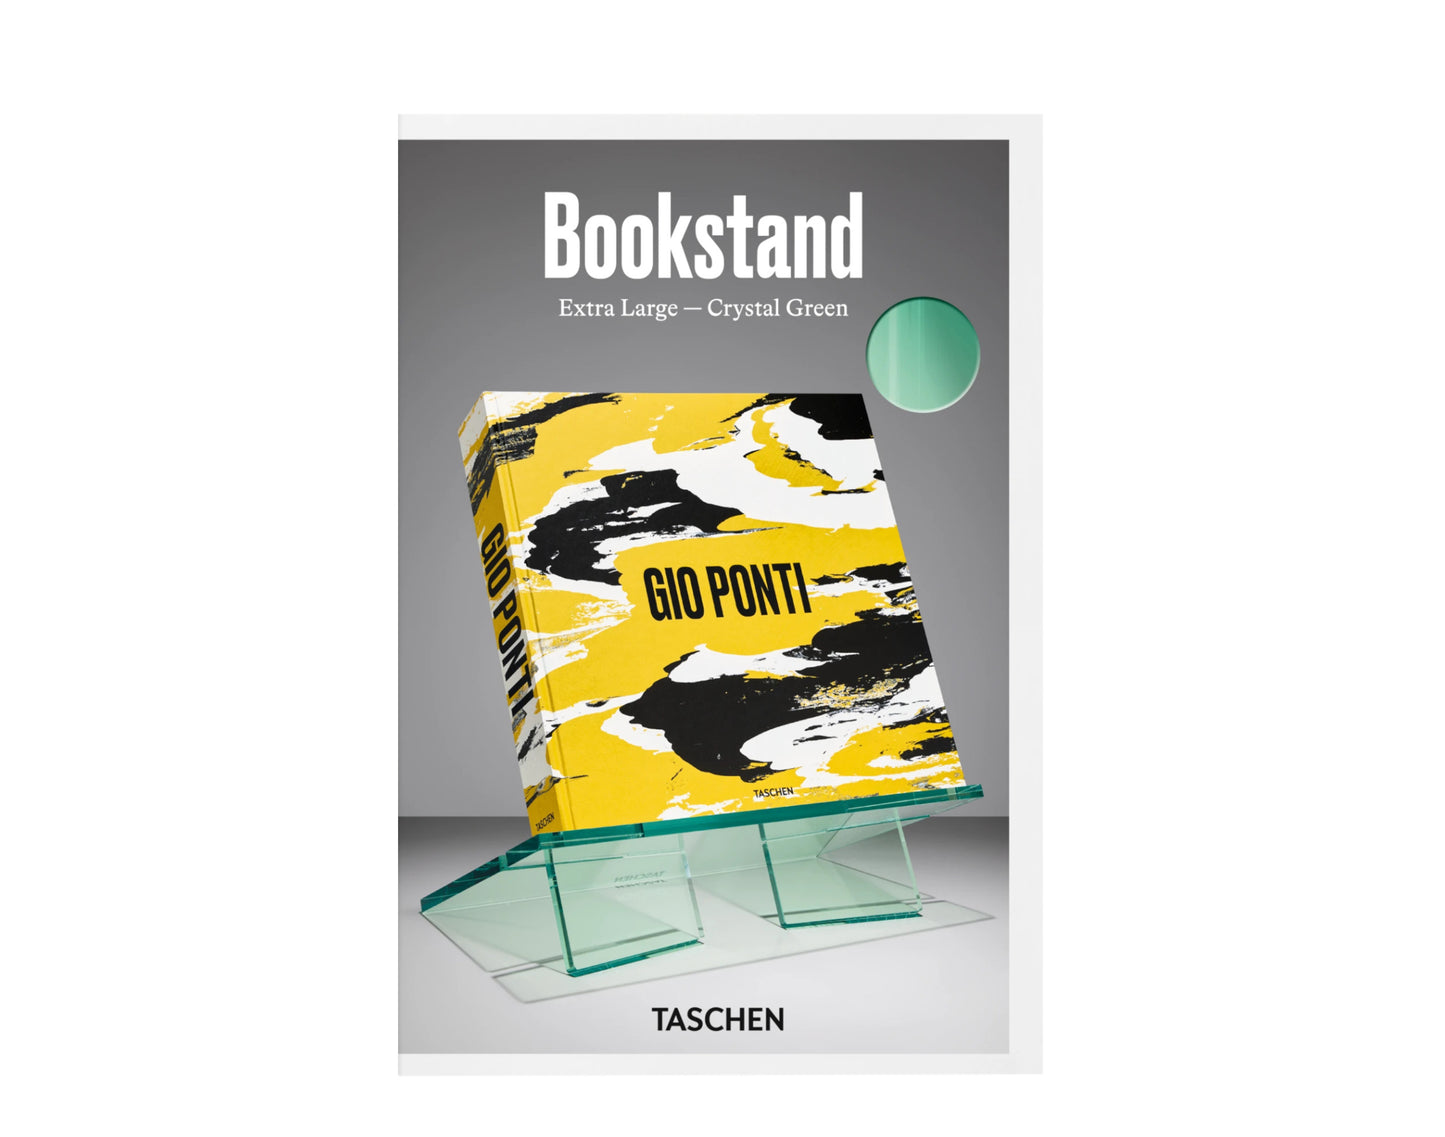 Taschen Books - Bookstand. Extra-Large. Crystal Green - Display Holder